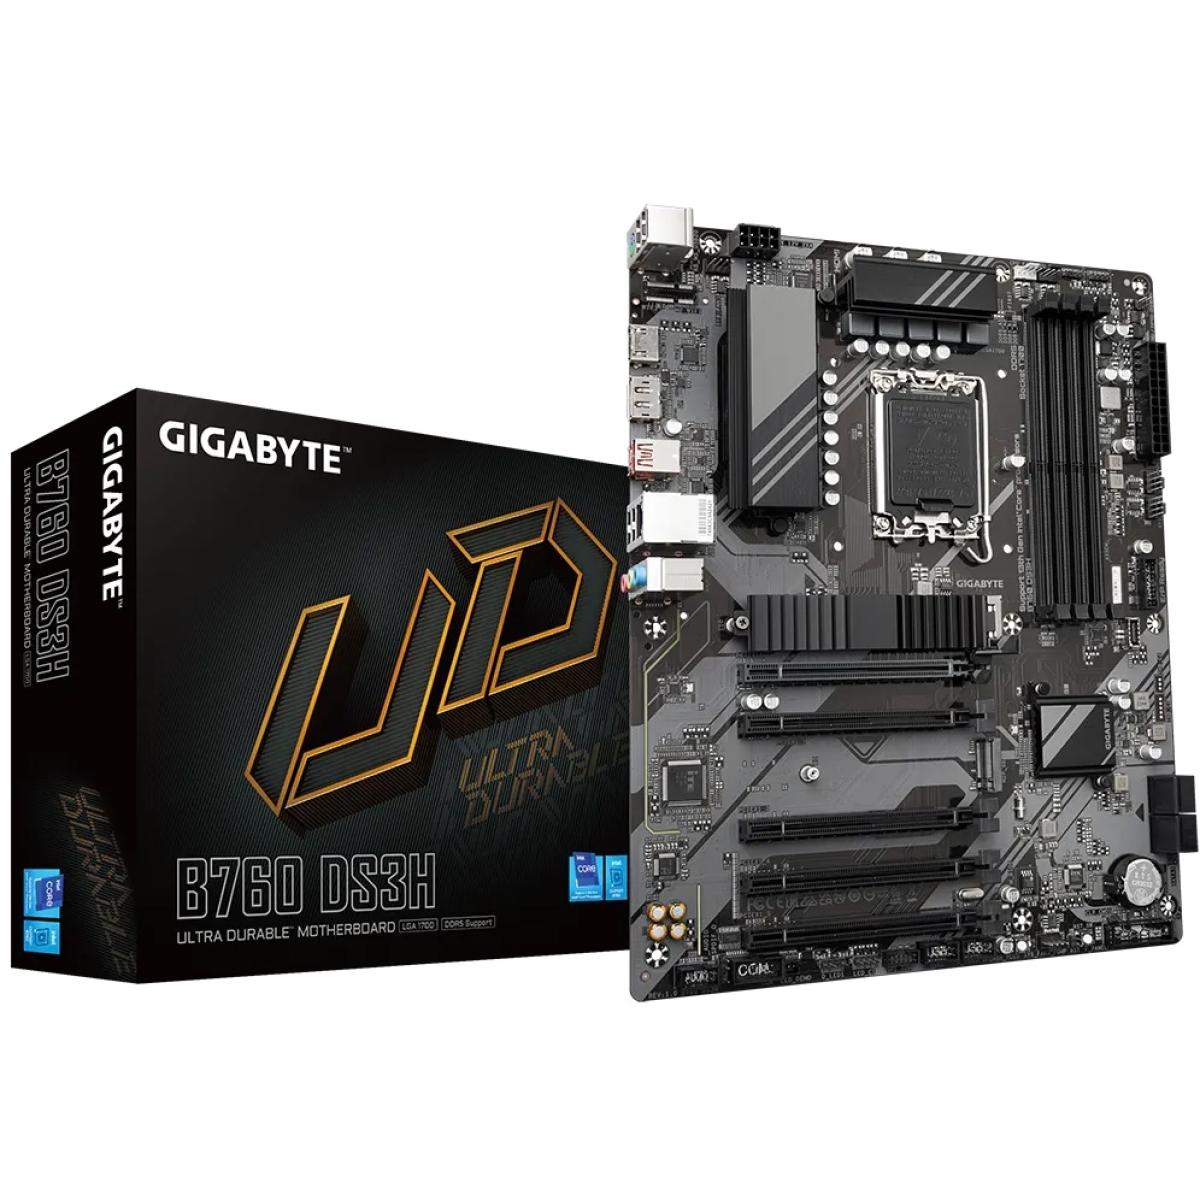 Gigabyte A620m Ds3h : Amd Am5 Mb – With 5+2+2 Phase Digital Vrm Addressable Led Strip Support On-Board Multi-Key Buttons 2x Copper Pcbs Design Mosfet Heatsinks Smartfan6 With 5x Temperature Sensors + 3x Hybrid Fan Headers- Amd A620 Chipset 4x Dual C